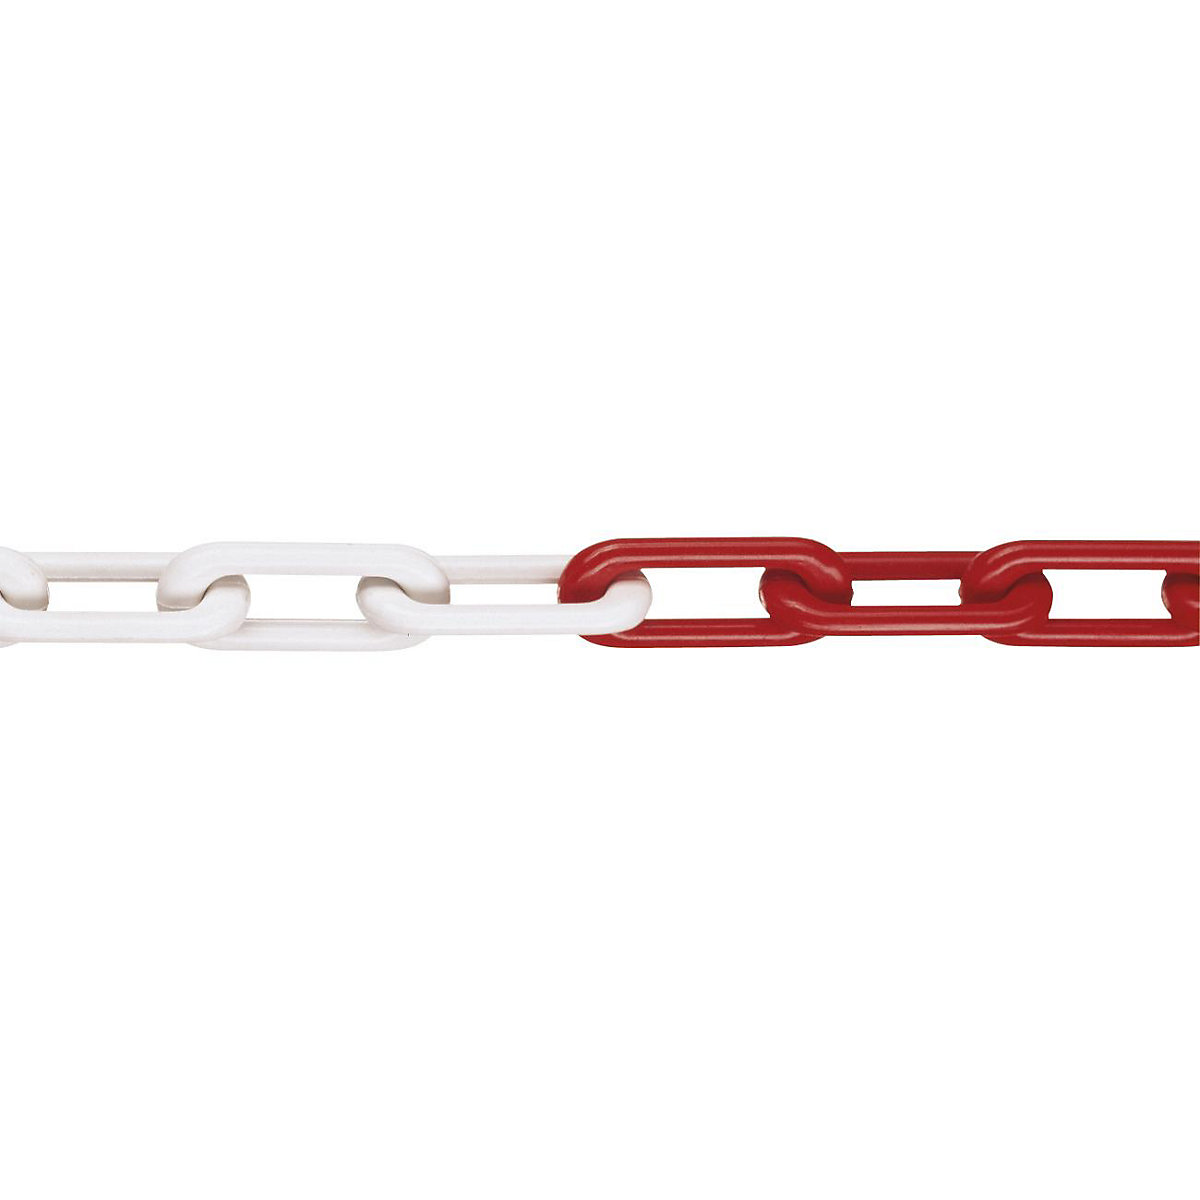 Nylon chain, MNK quality standard 8, band length 25 m, red-white, 4+ items-7